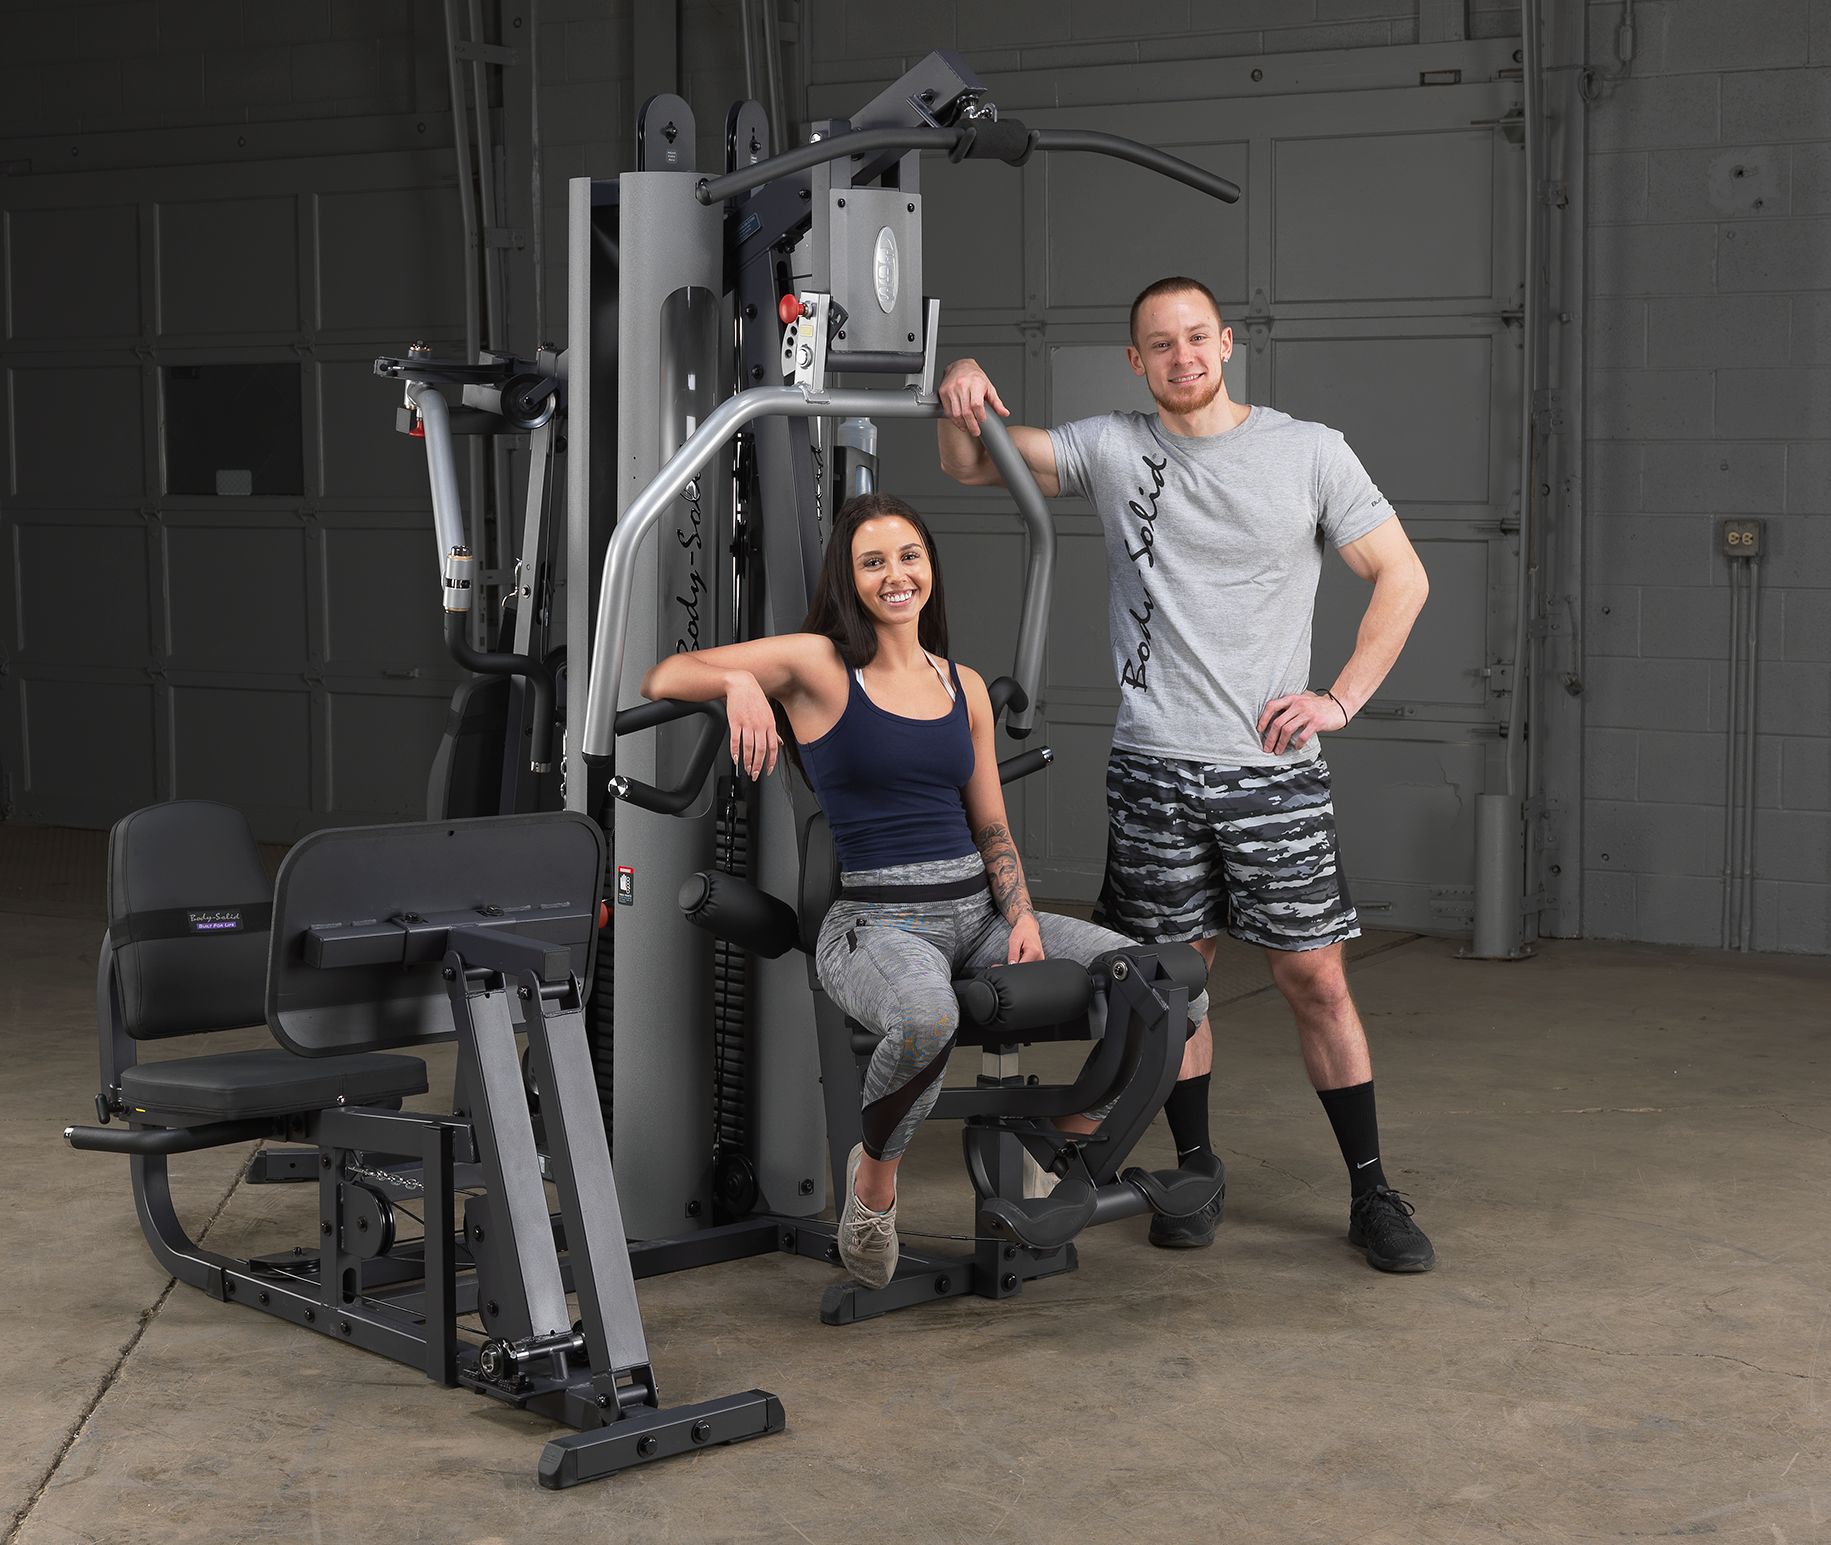 the third entry on our list is the best bang for your buck the G9S Home Gym from Body-Solid 